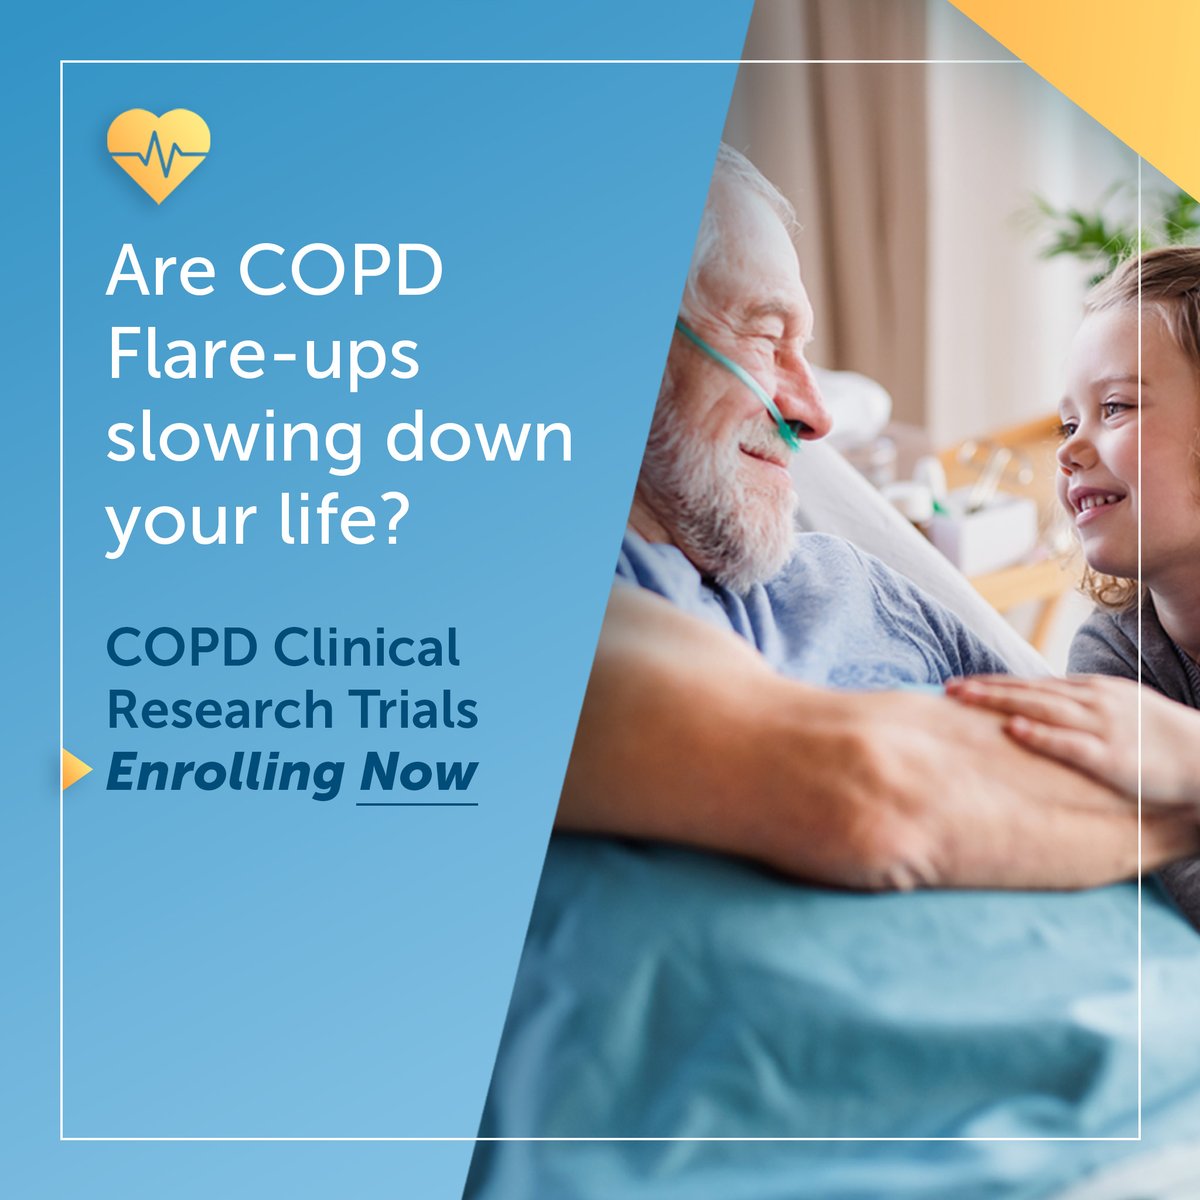 If you have been struggling with #COPD, you might want to consider joining a #clinicaltrial. If you qualify for the trial, you will receive no-cost trial medication, appointments, and potential compensation. See trials nearby: trialsearch.com/bs/80d0821c74